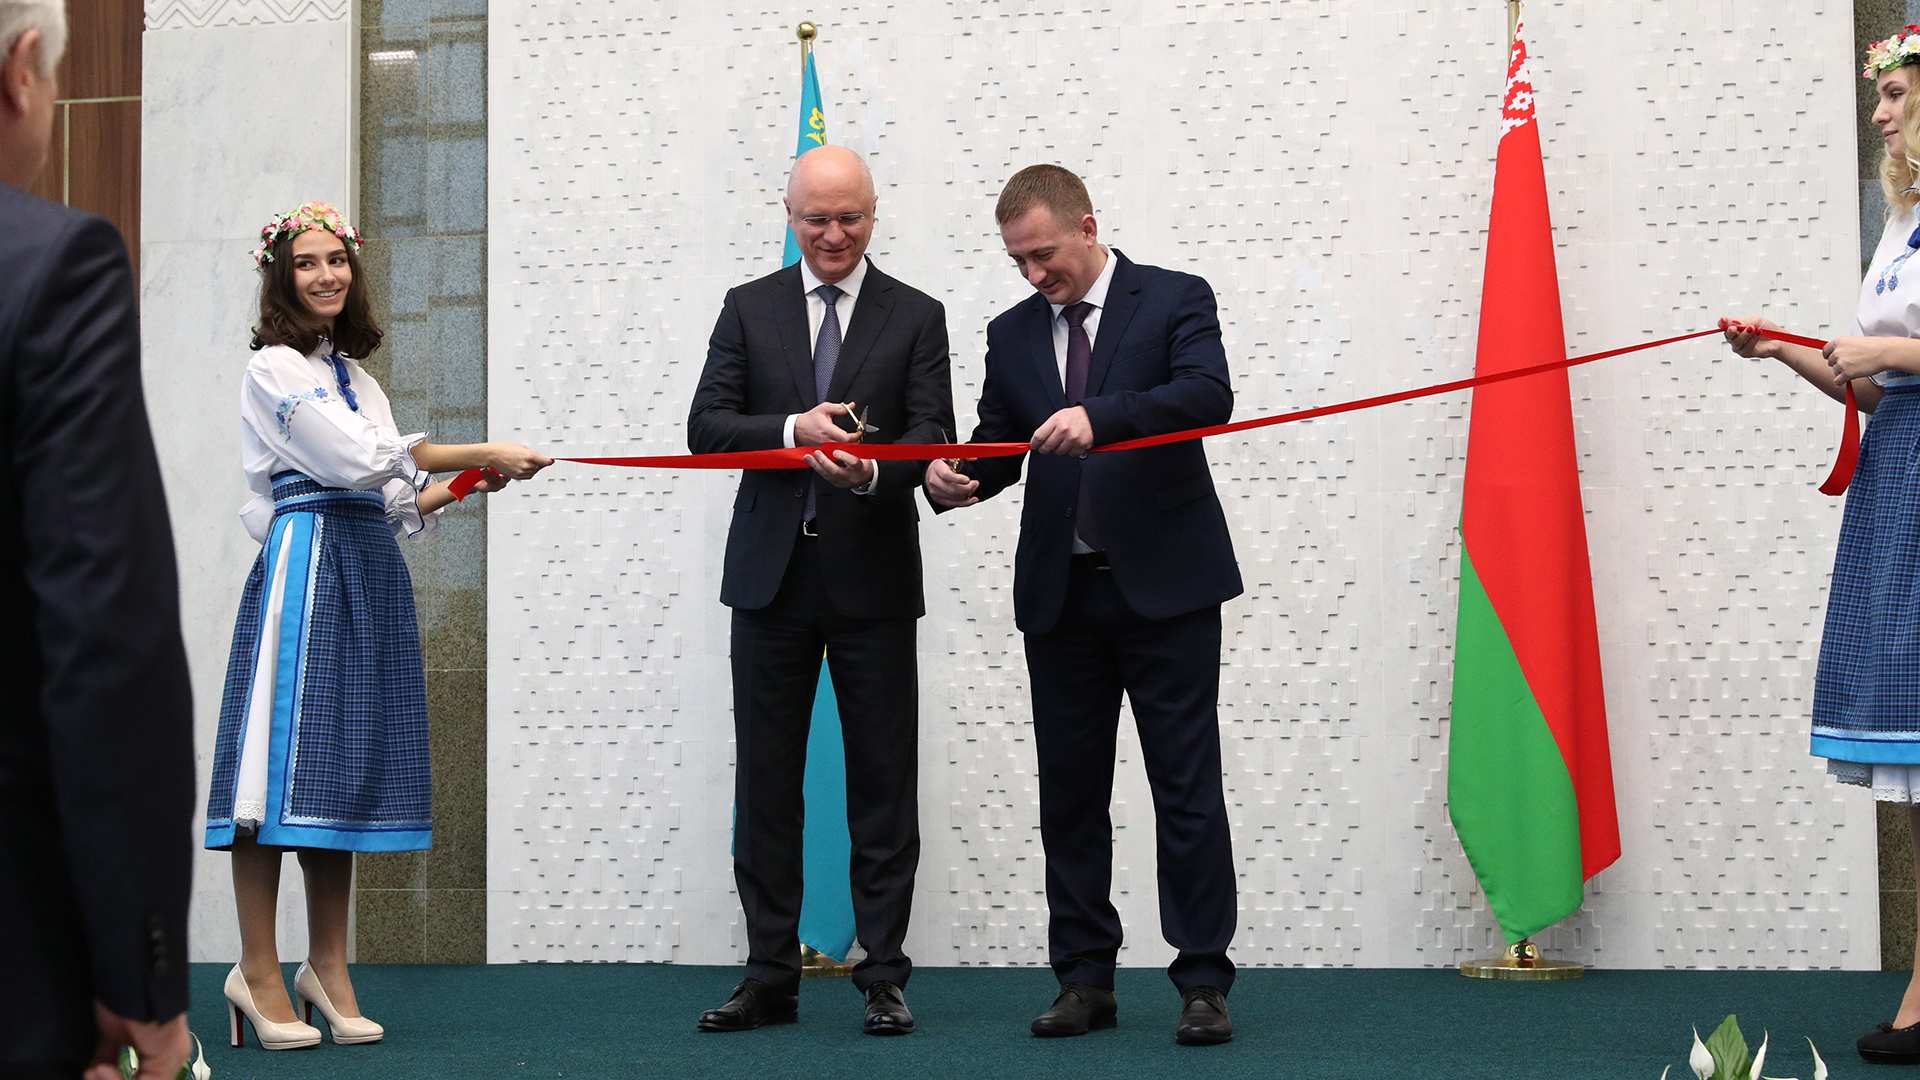 New building of Embassy of the Republic of Belarus opened in Nur-Sultan